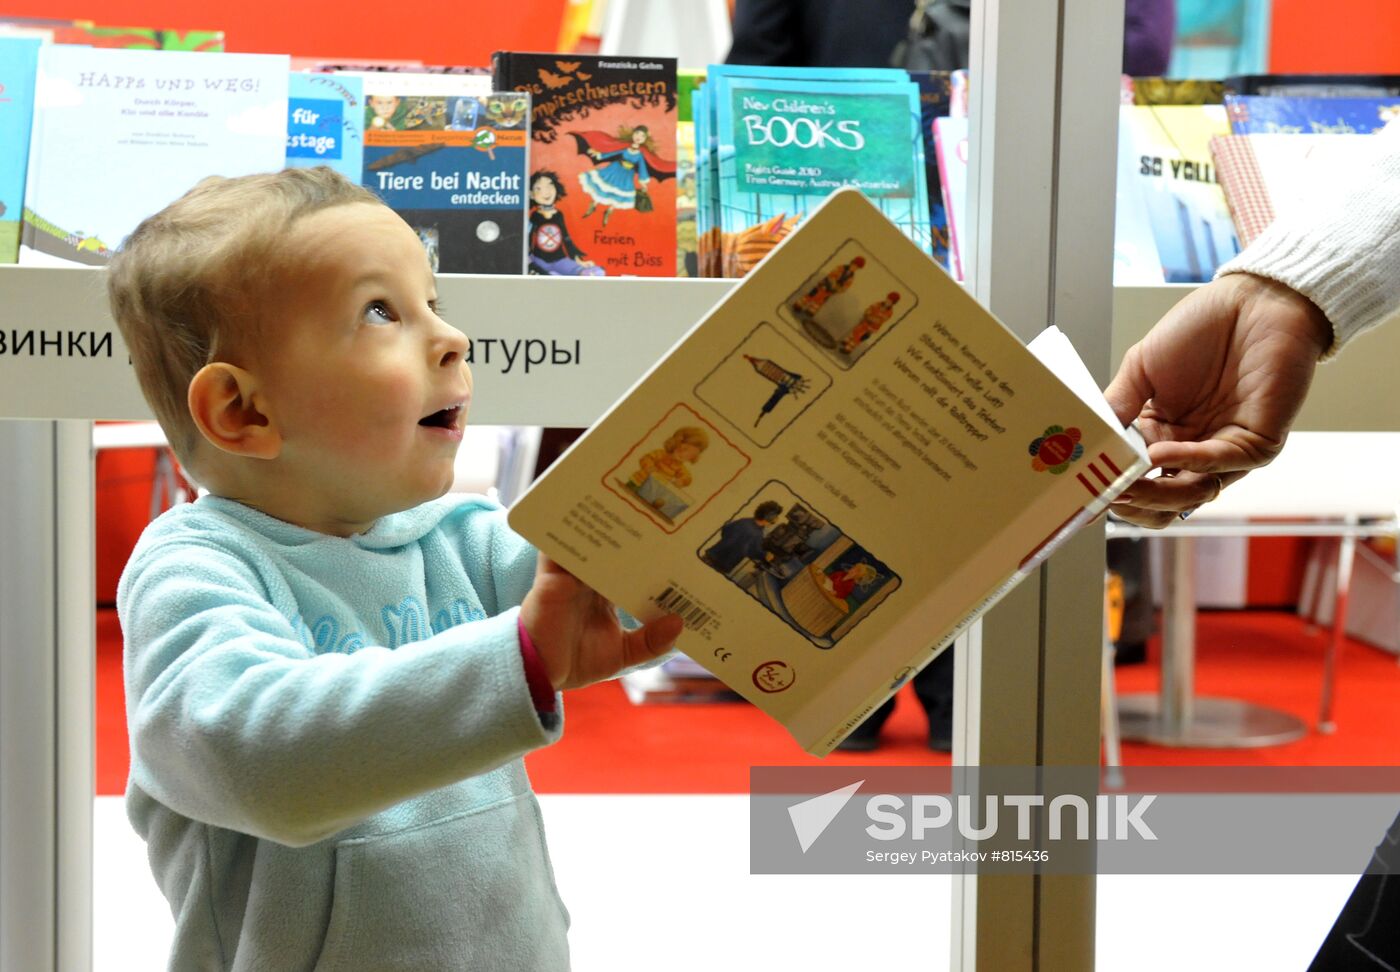 Twelfth Non/fiction intellectual literature fair opens in Moscow